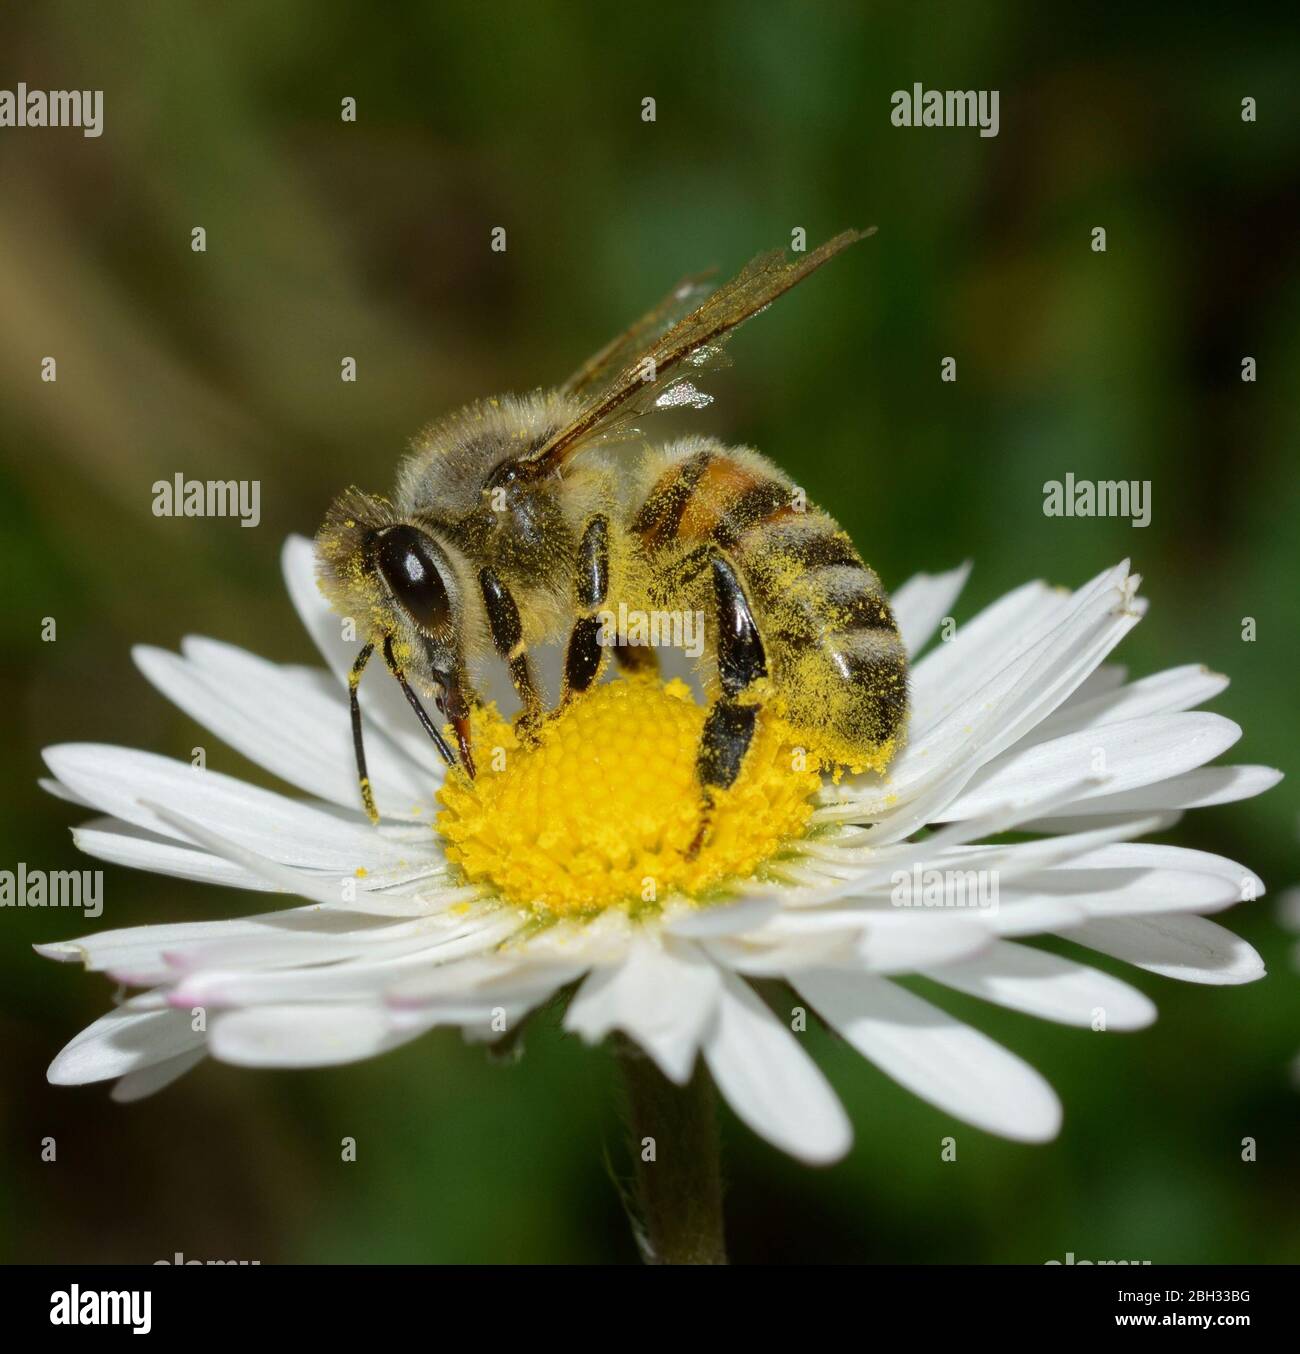 close-up of honey bee collecting nectar on southern daisy flower on blurred background of green grass Stock Photo